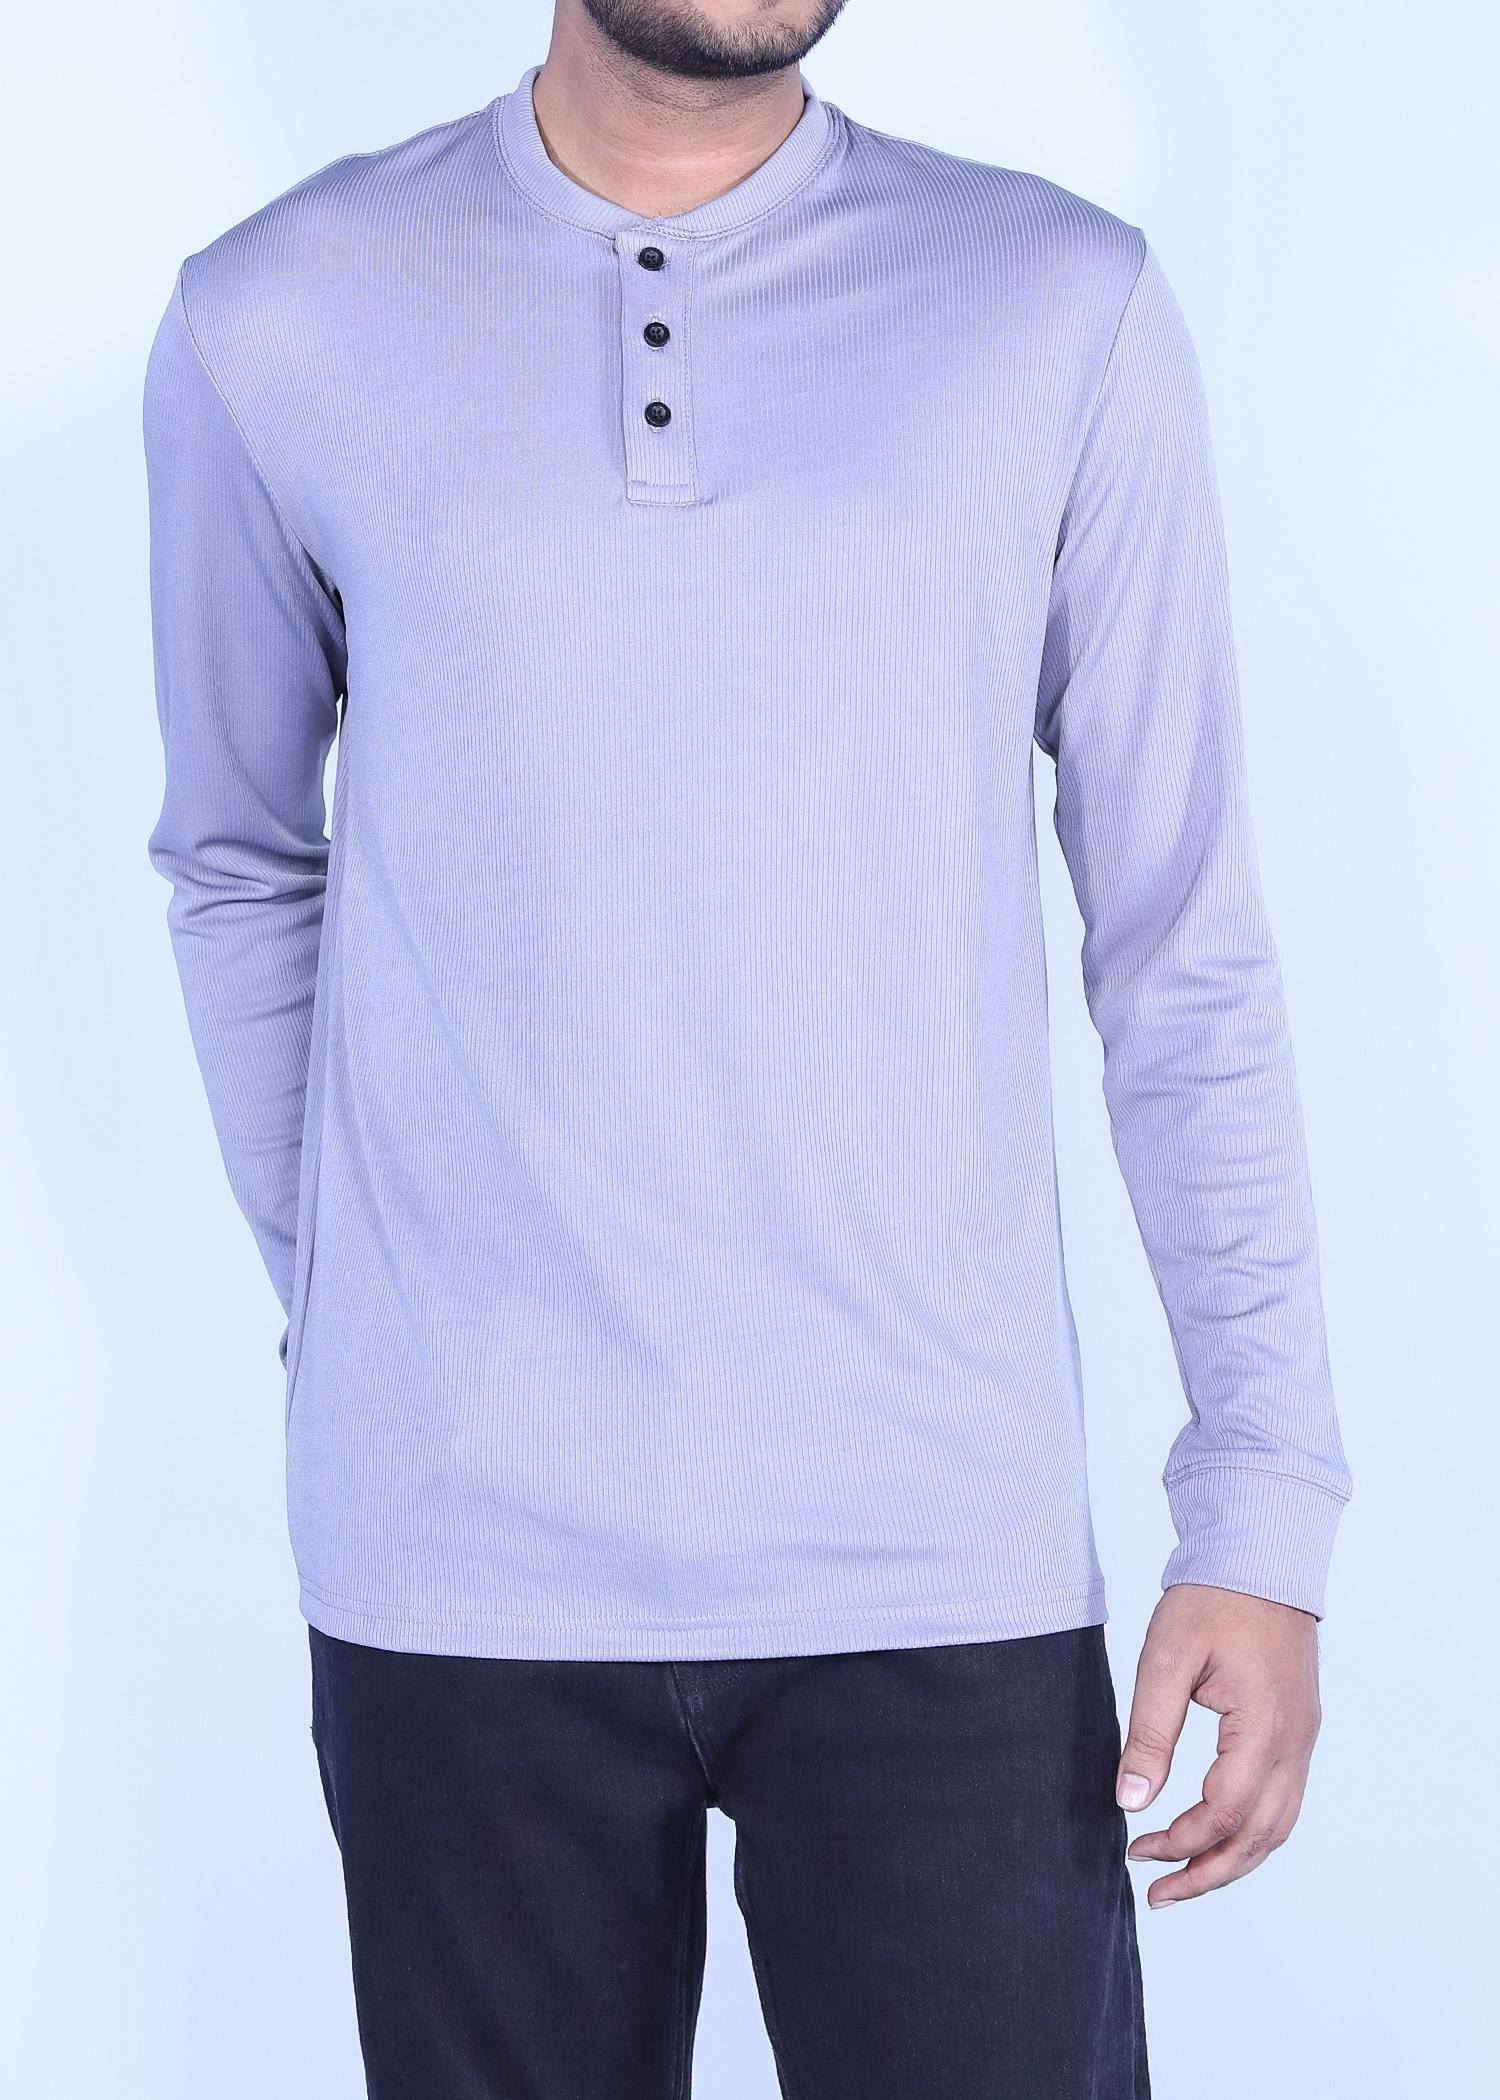 iwi henley ls t shirt grey color half front view